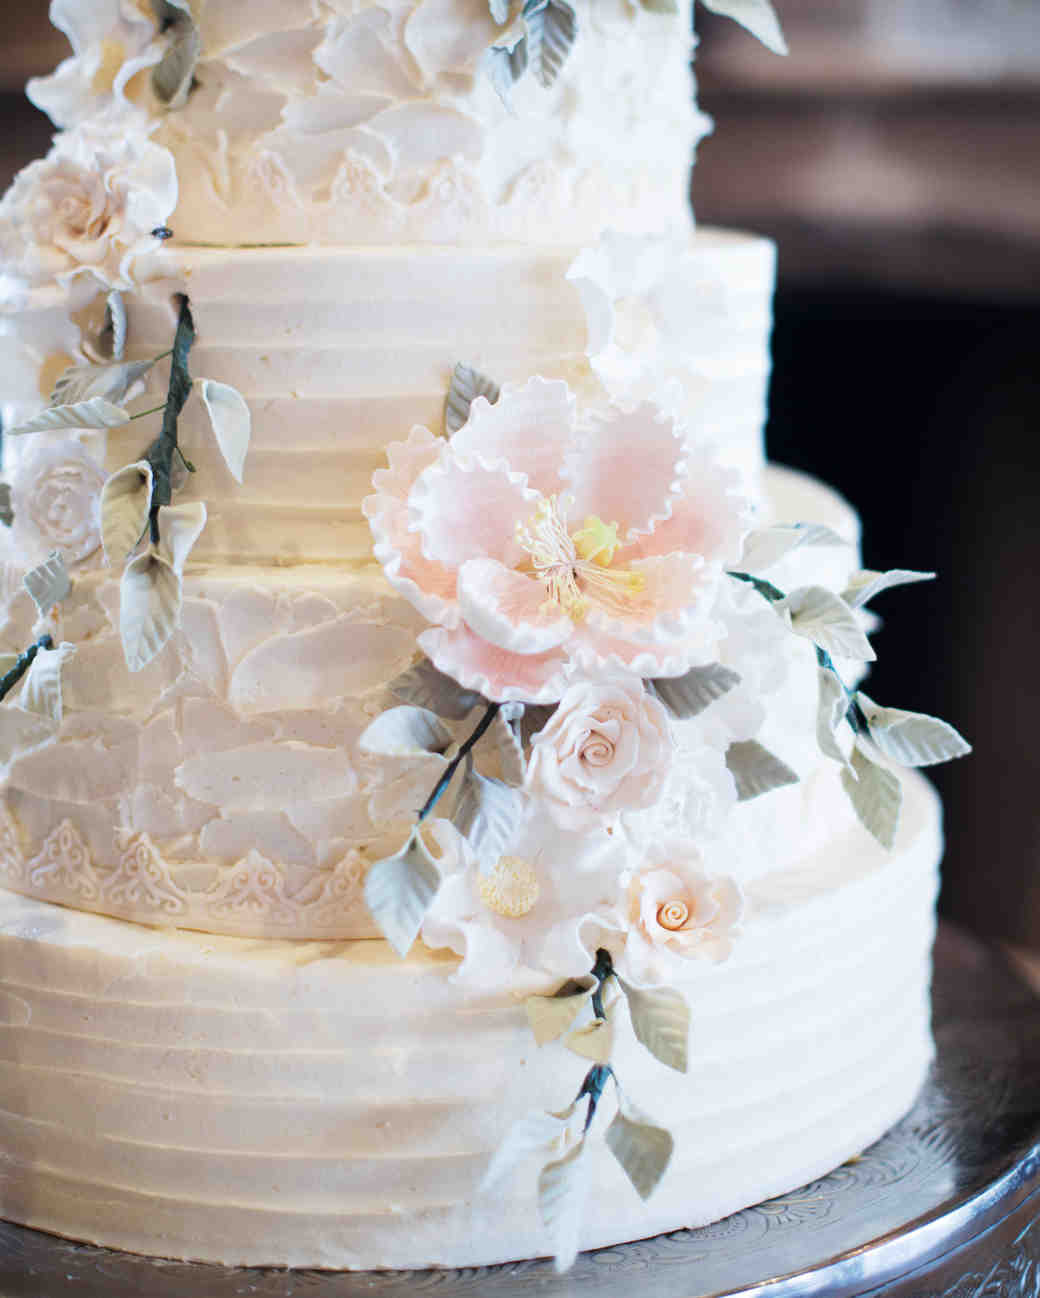 Cakes Designs For Wedding
 25 Wedding Cake Design Ideas That ll Wow Your Guests